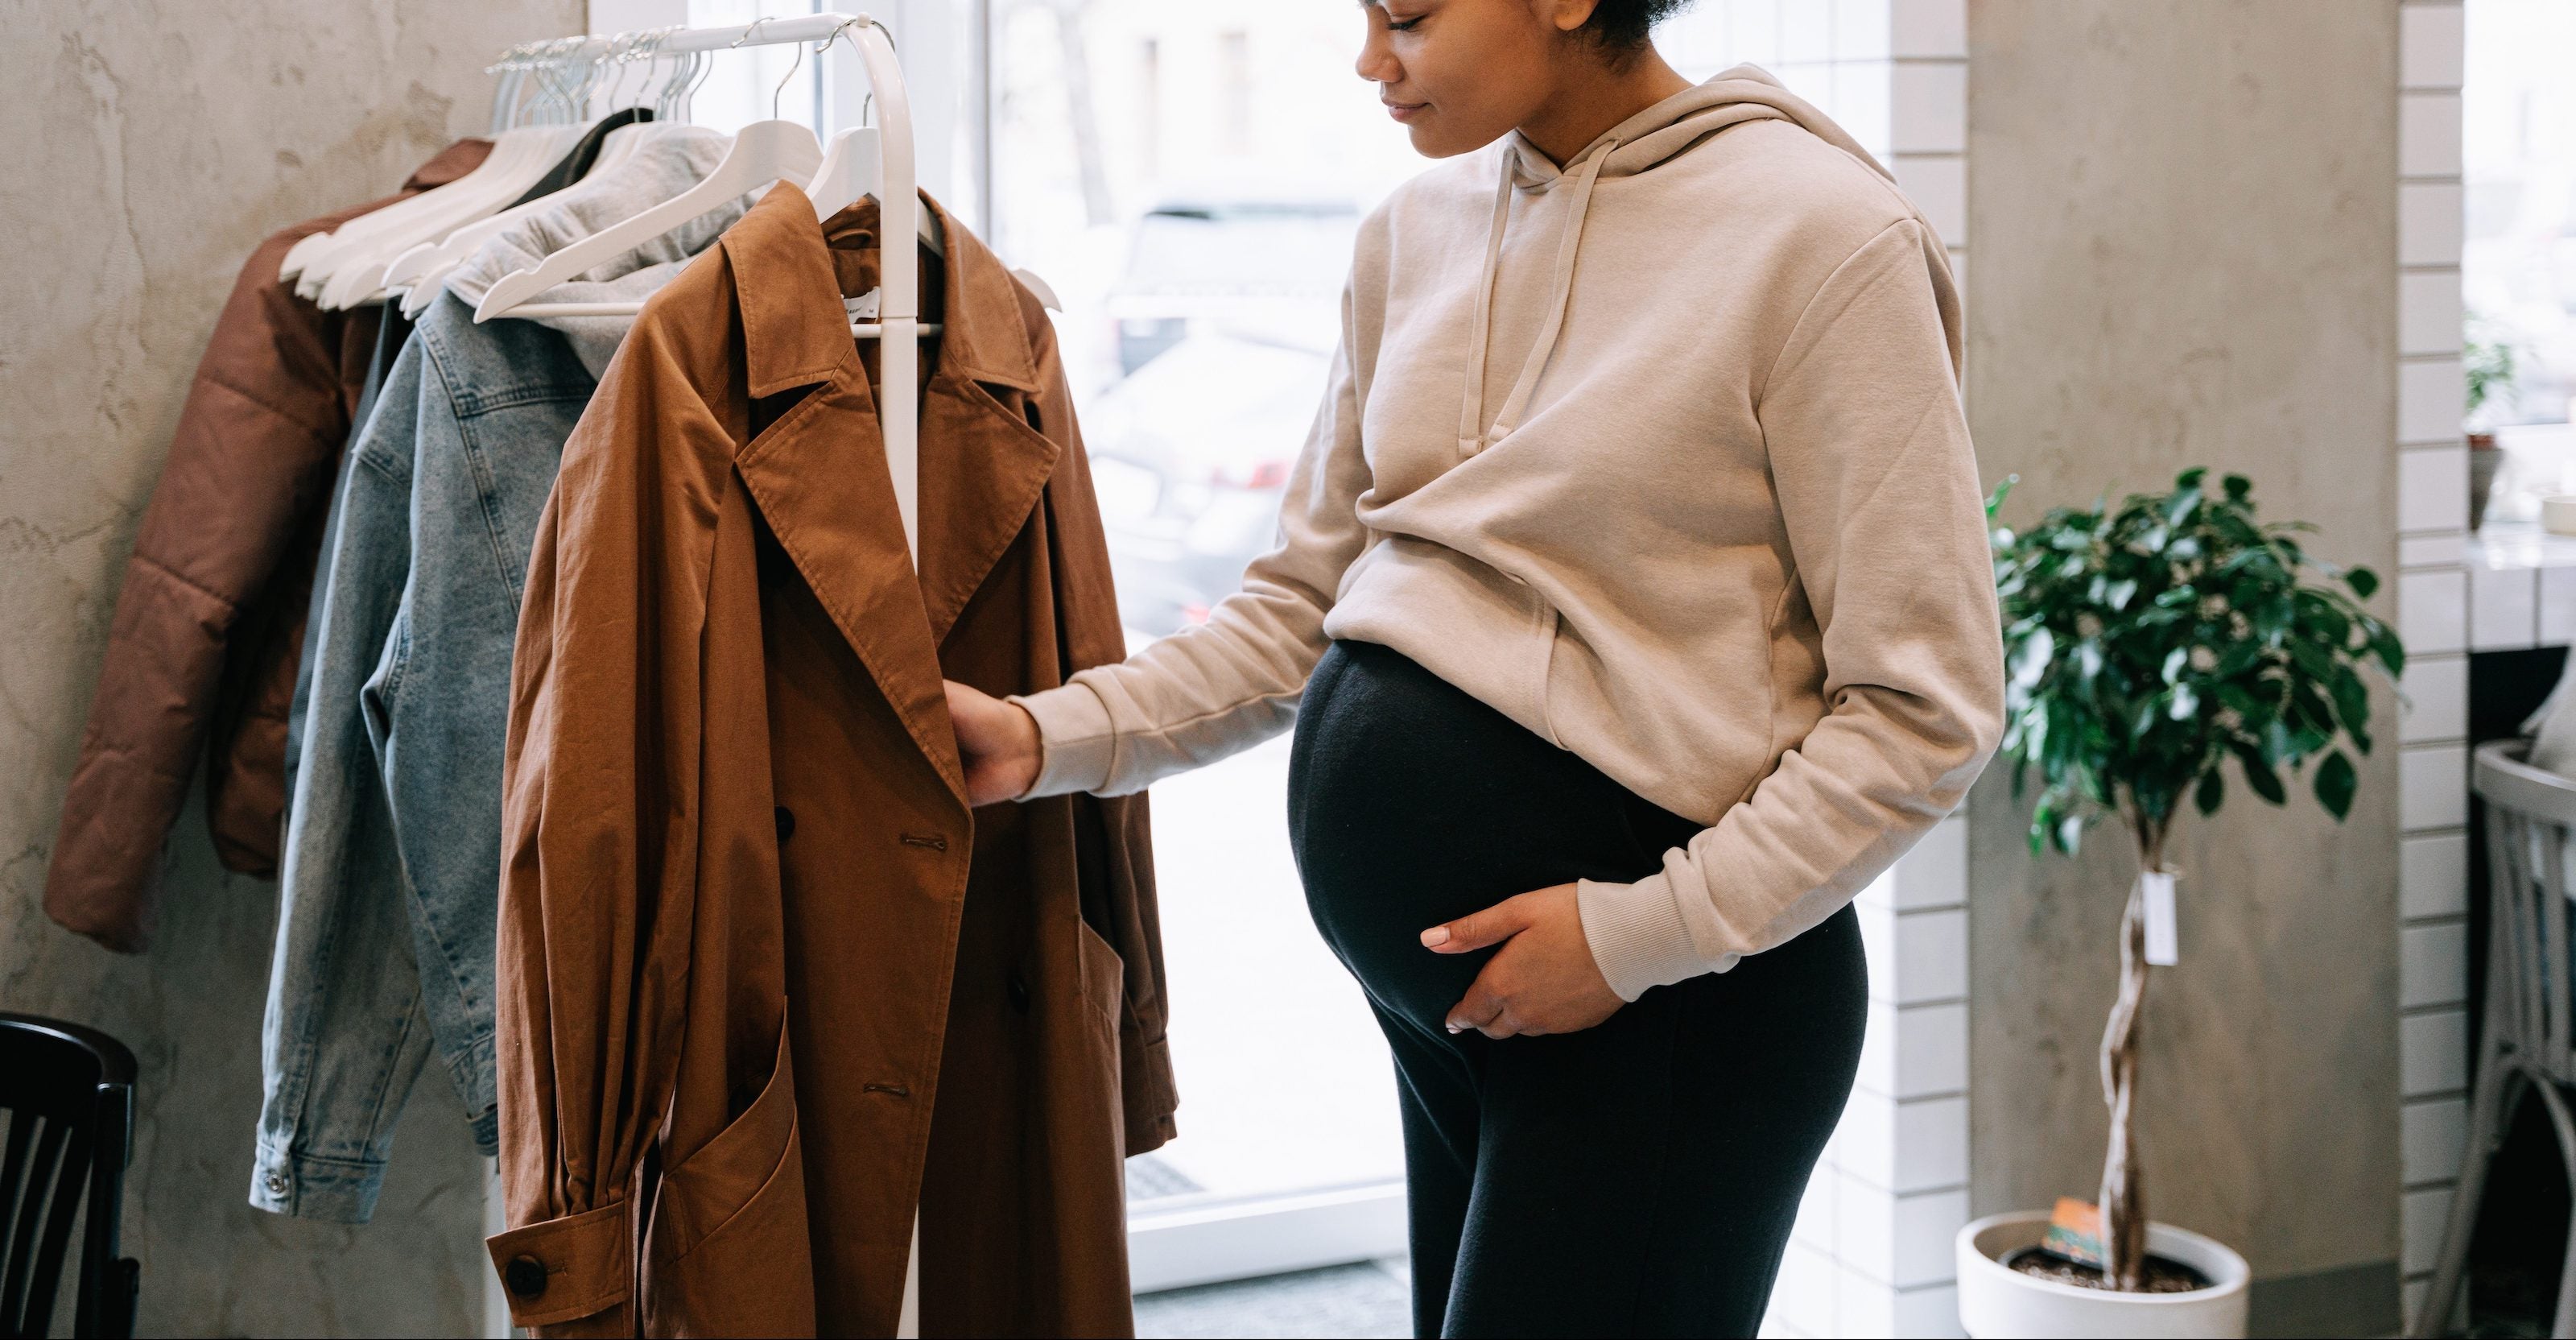 For The Creators: A Sustainable Maternity Fashion Platform